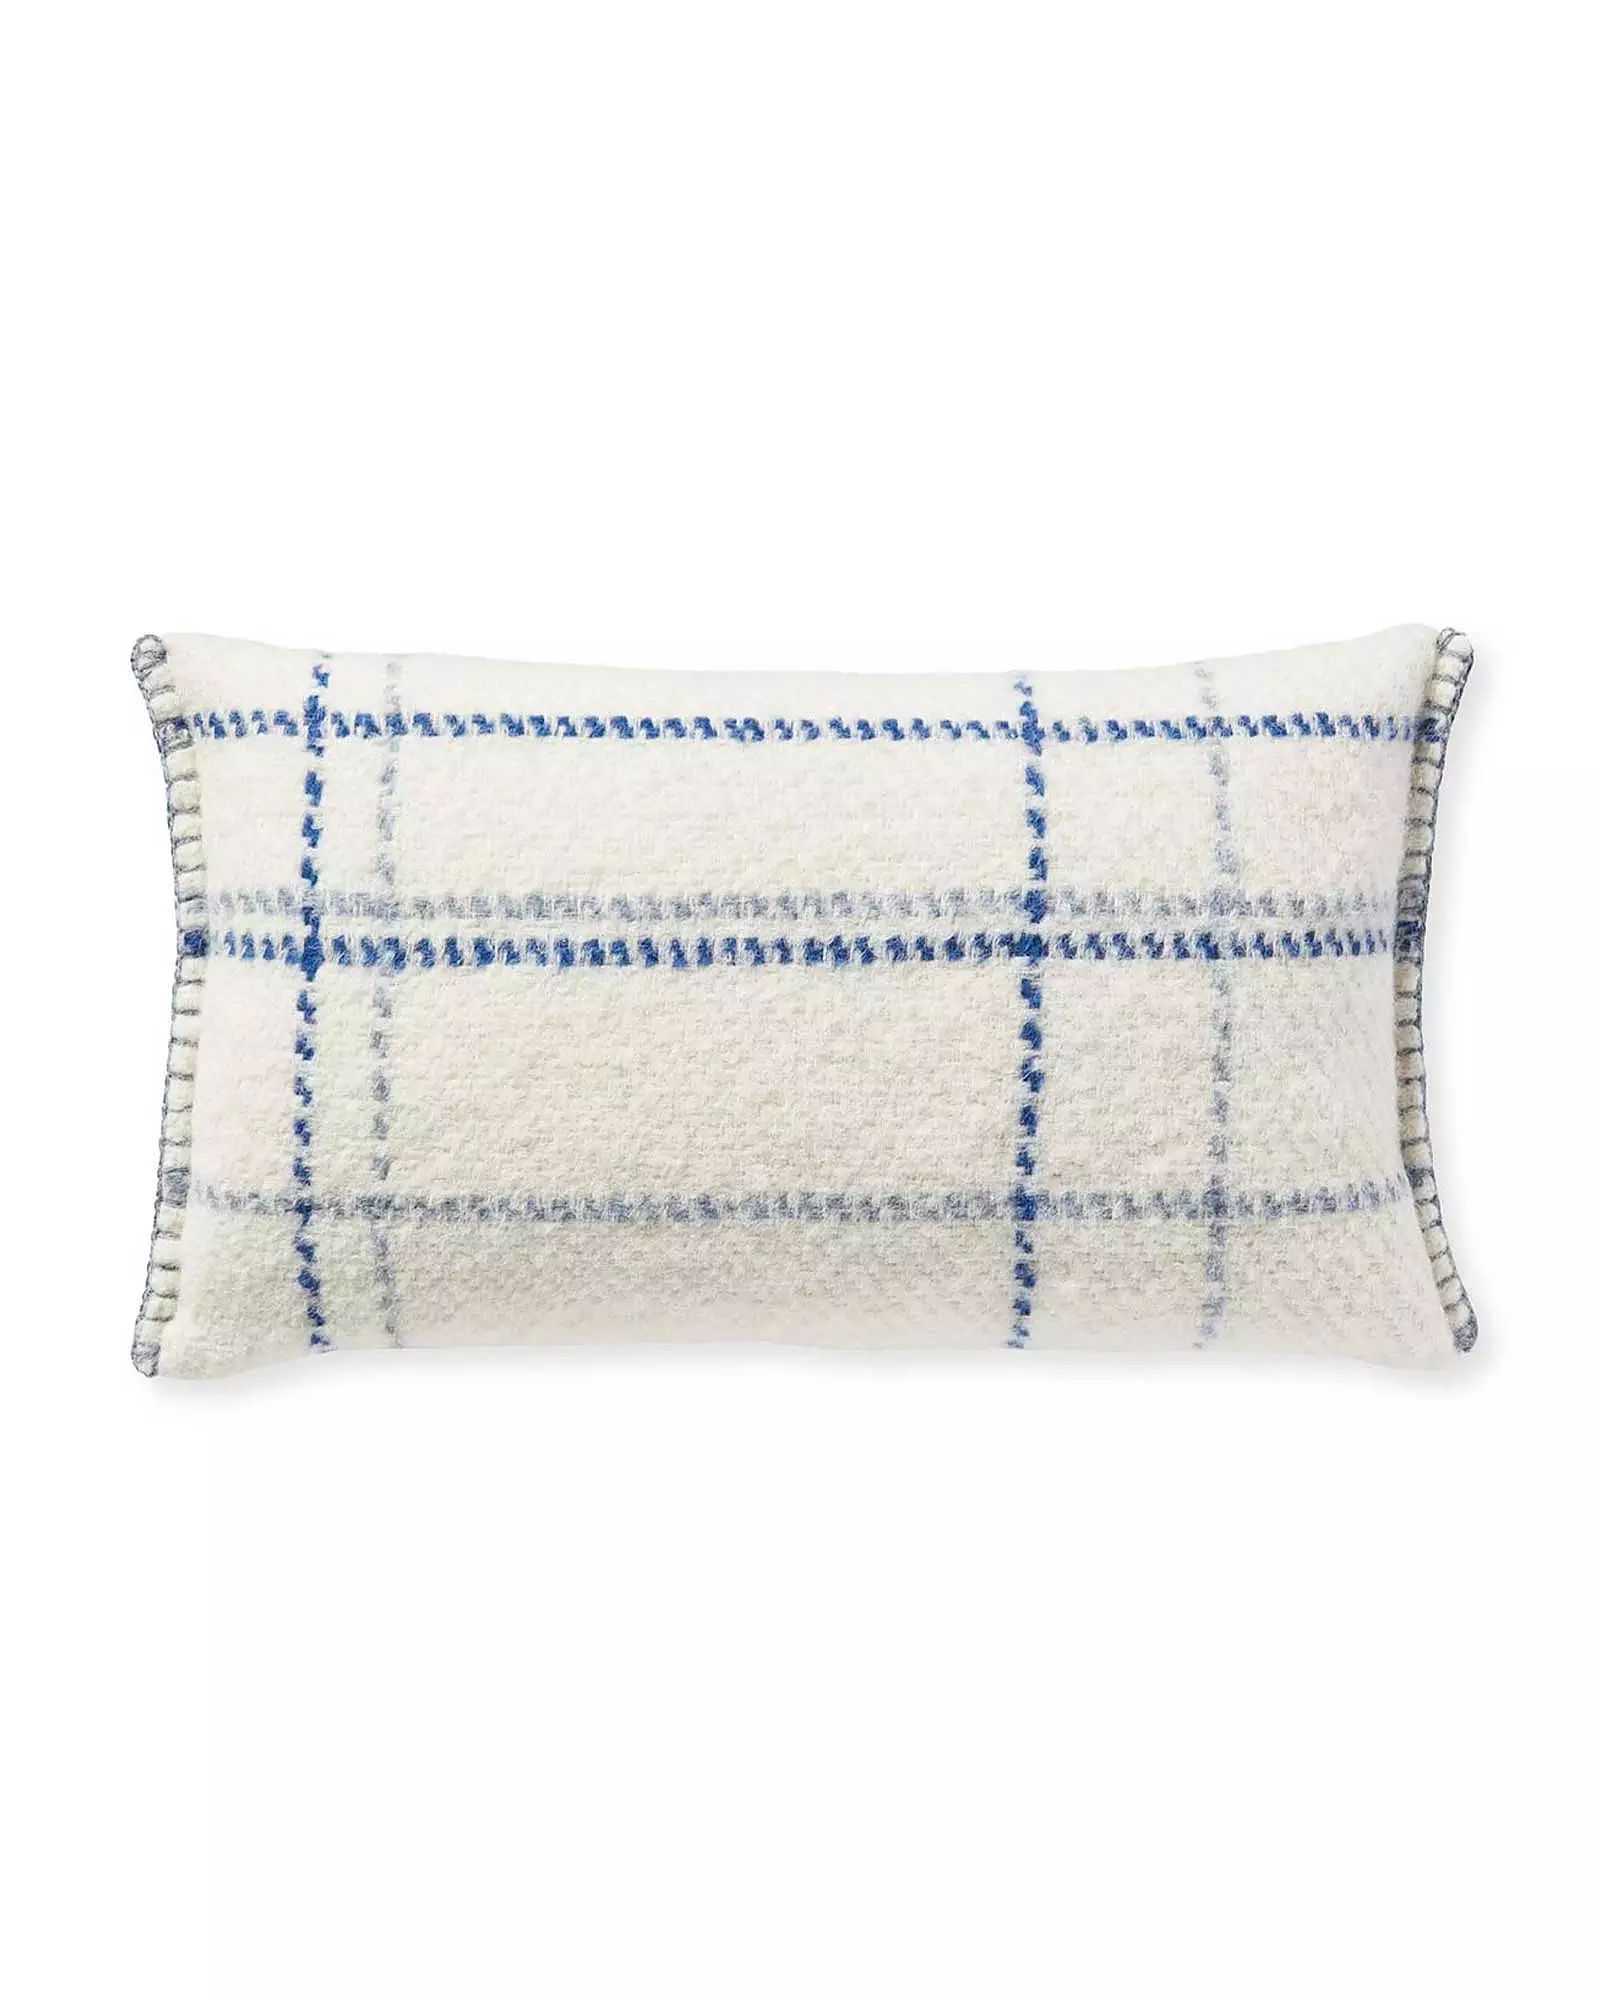 Stratton Pillow Cover | Serena and Lily